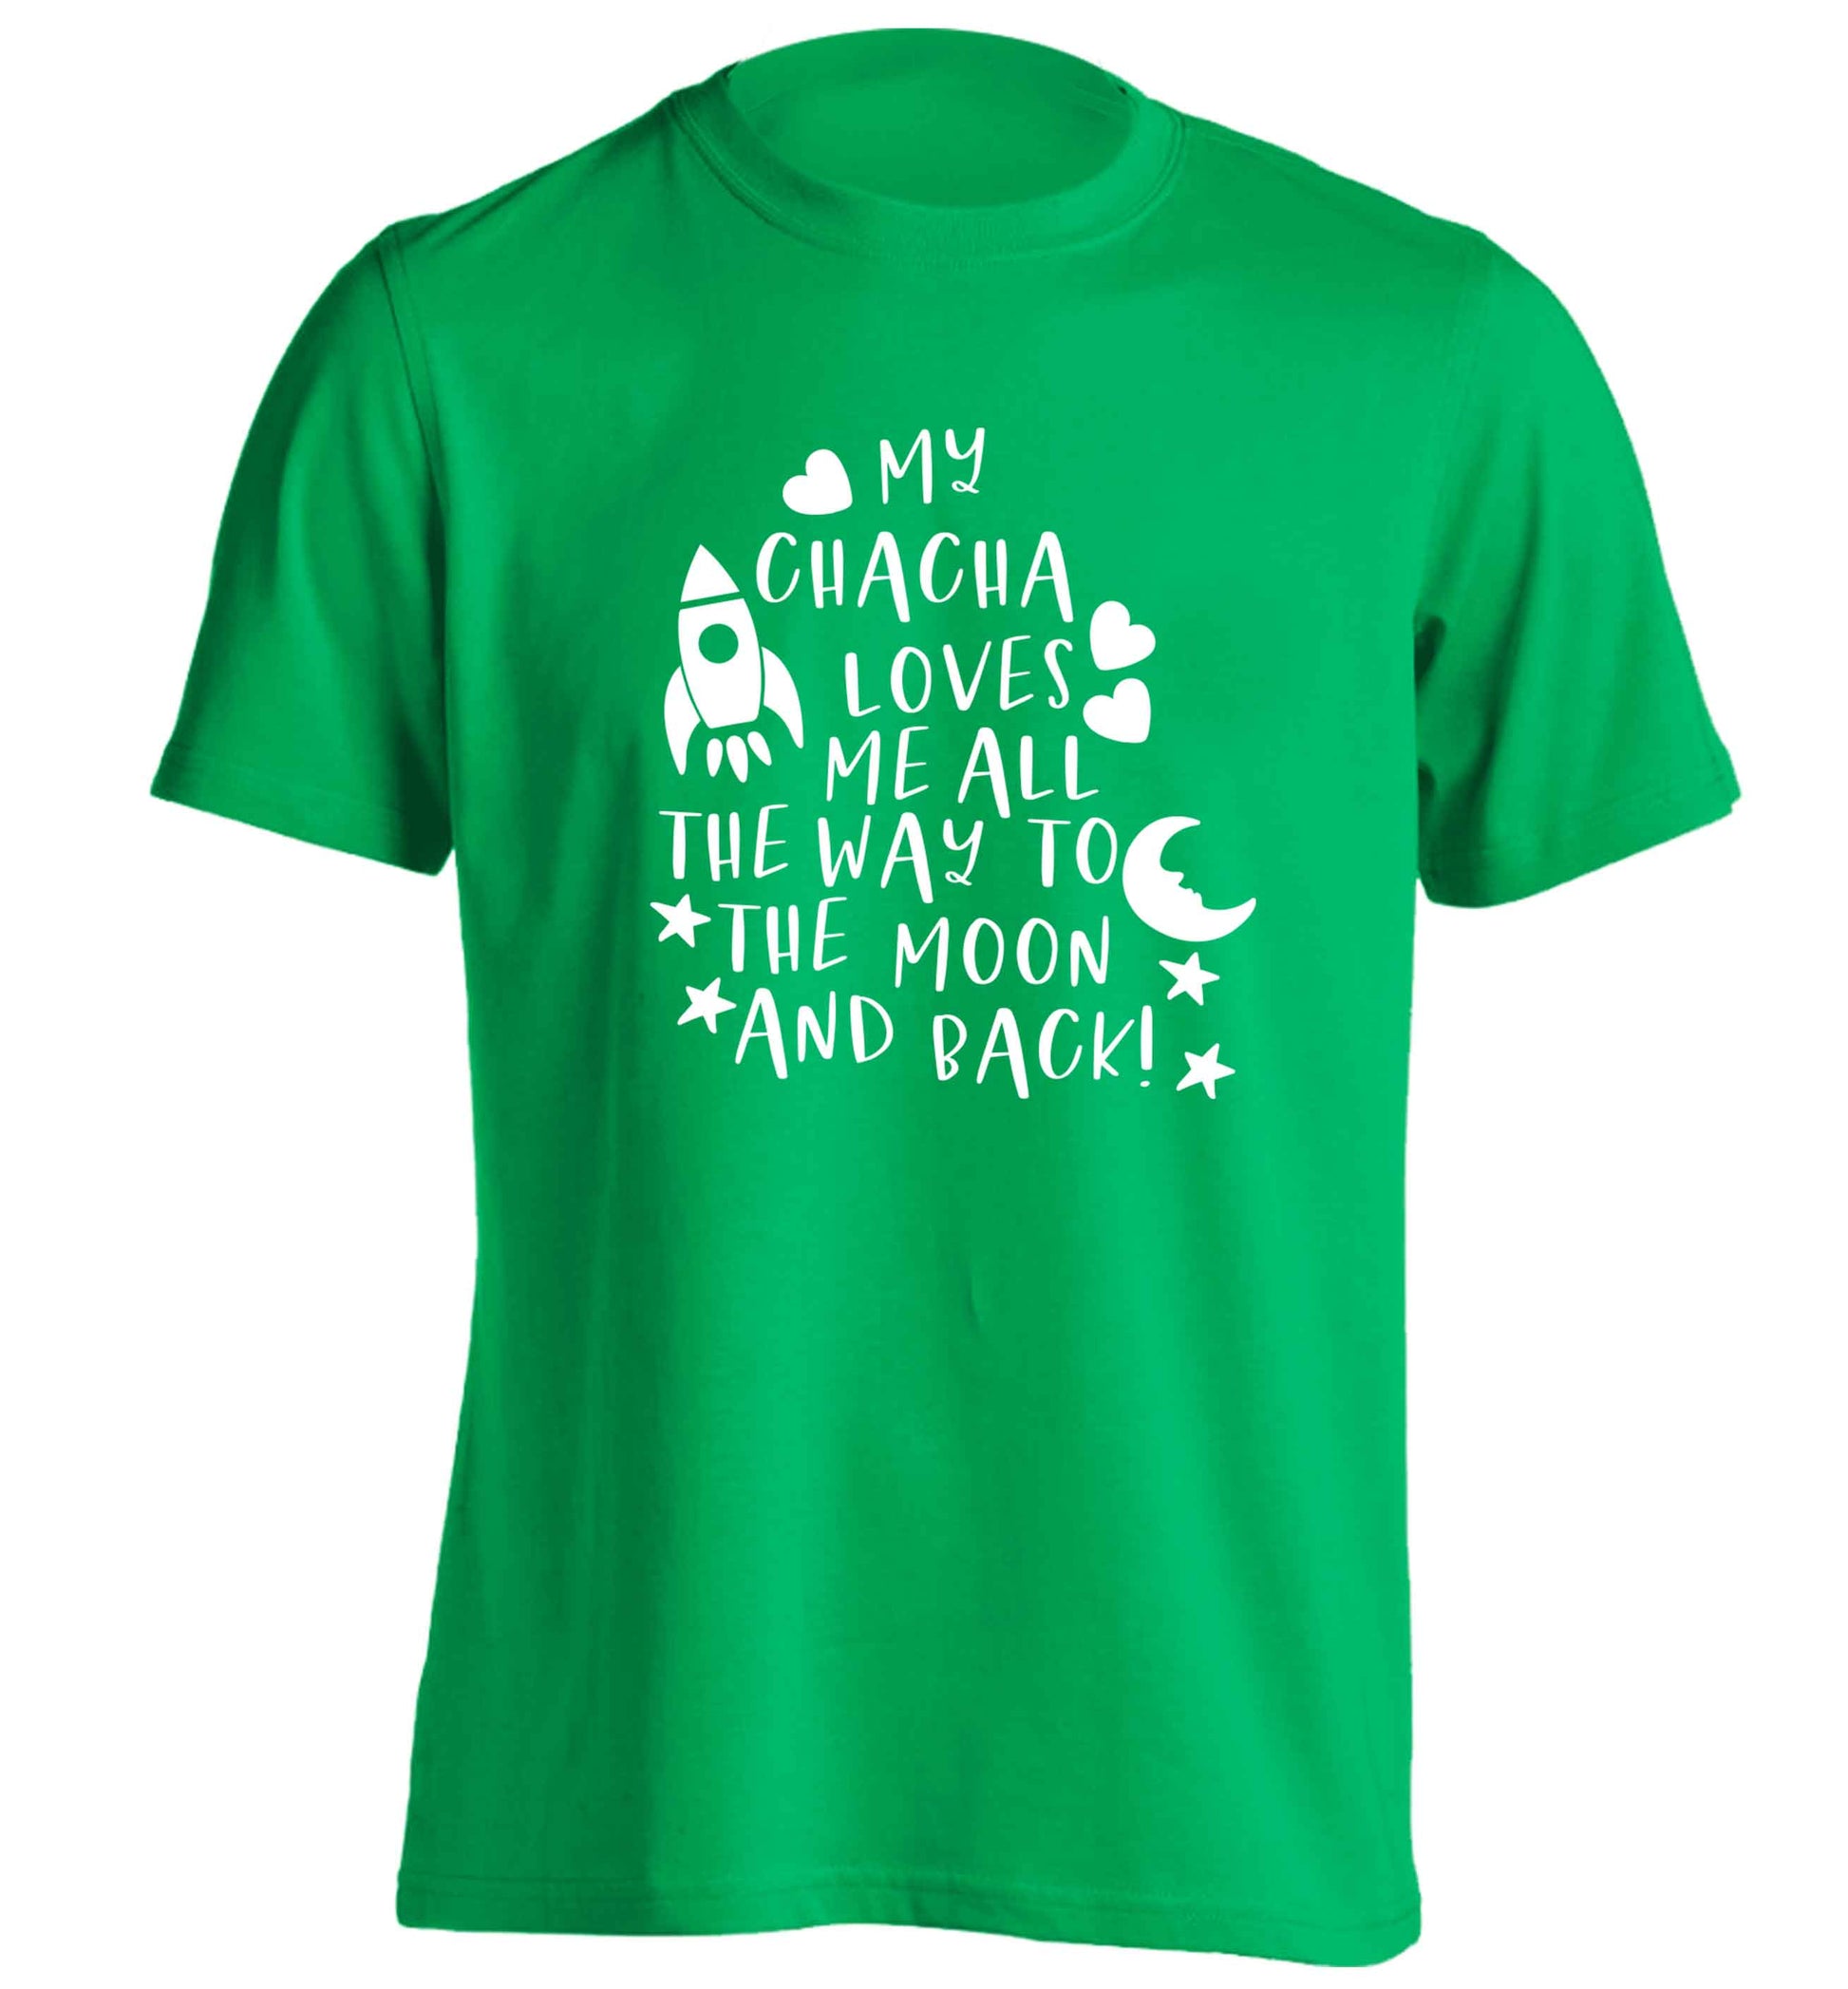 My chacha loves me all the way to the moon and back adults unisex green Tshirt 2XL